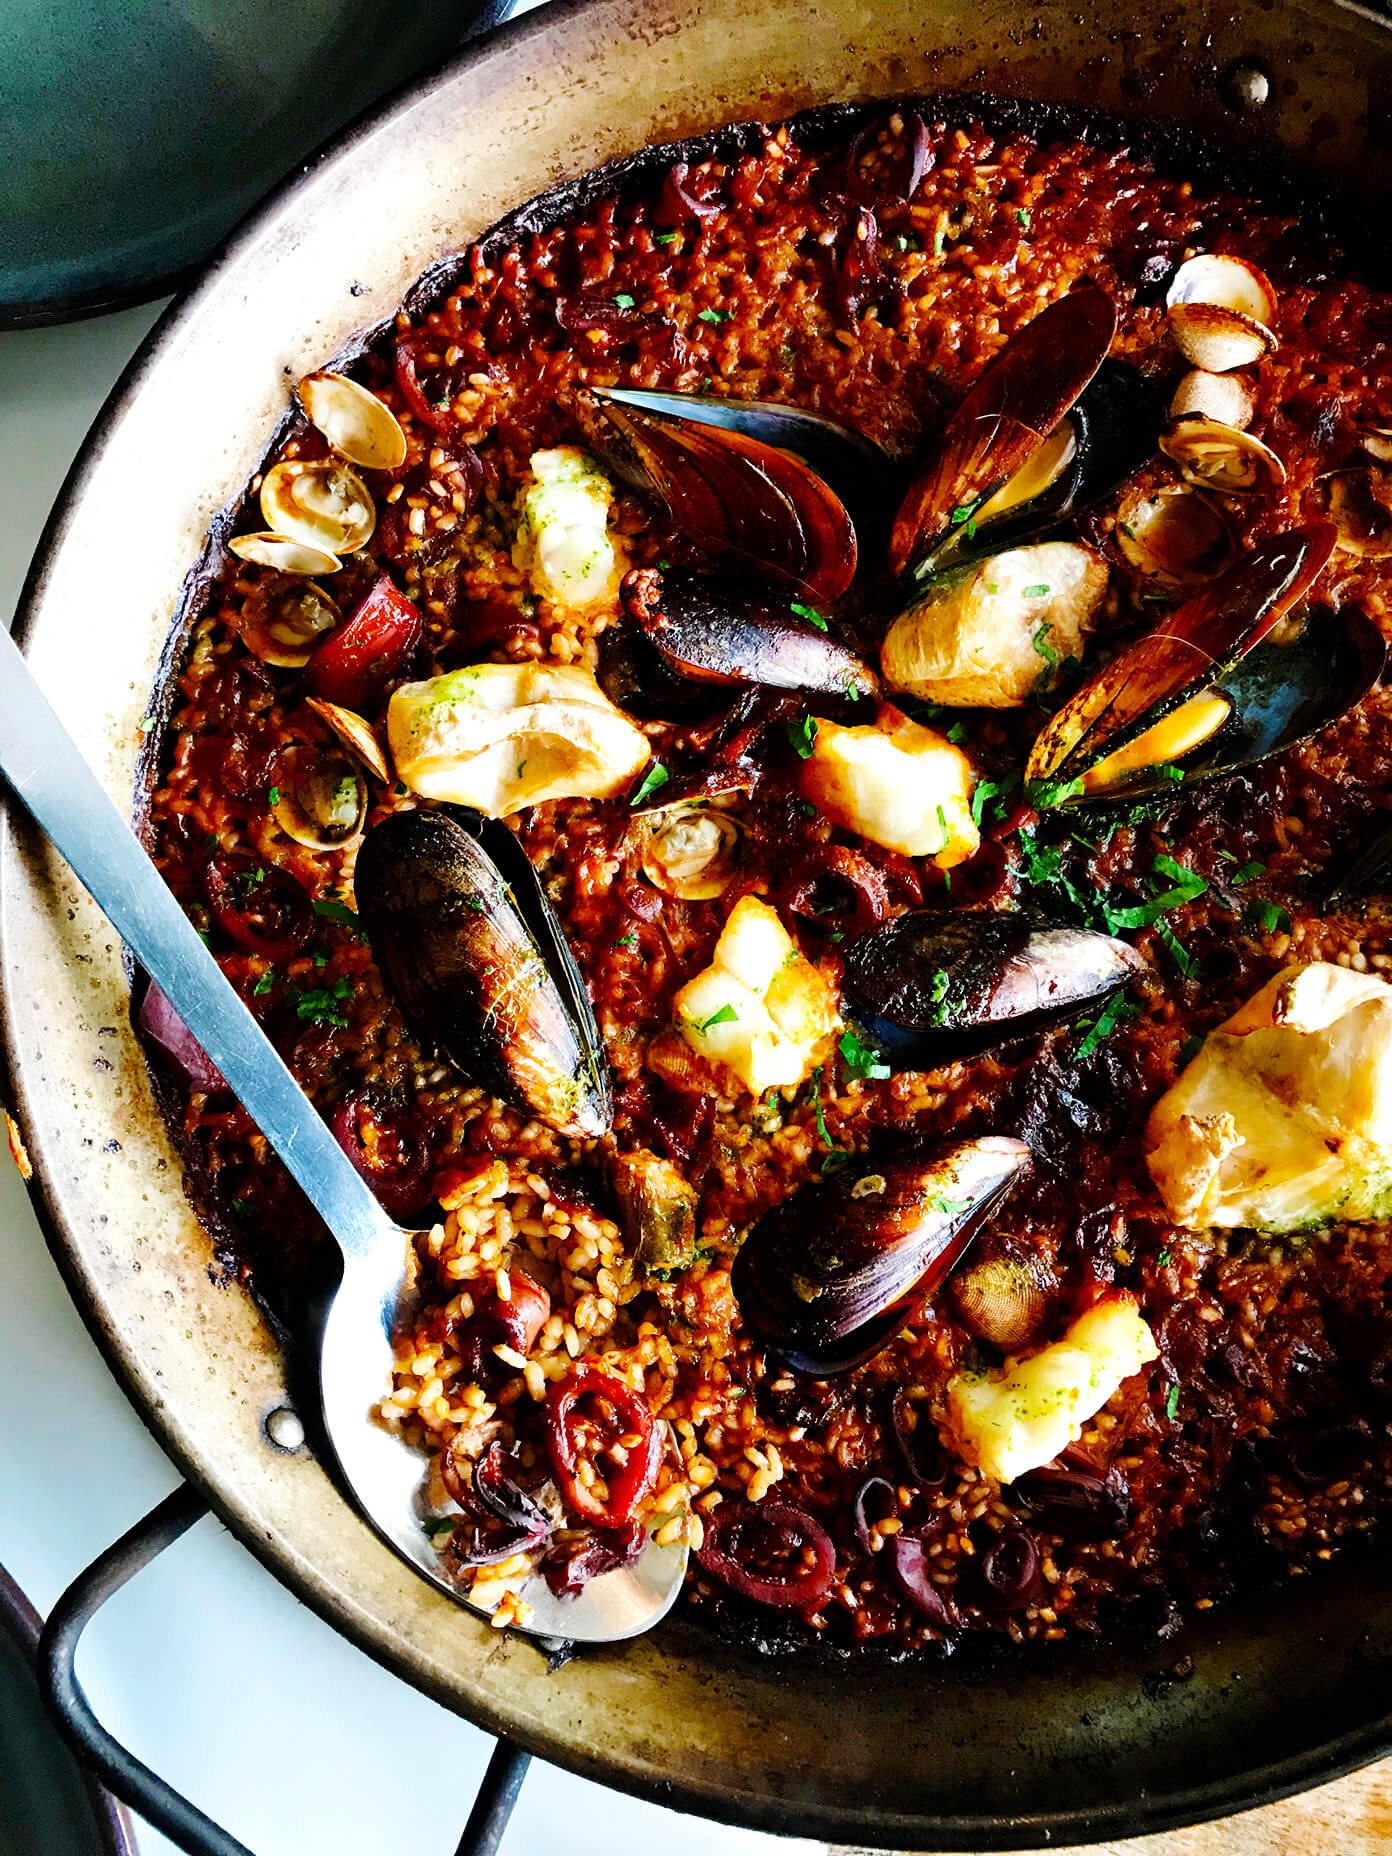 Best Paella In Barcelona at Barraca | Gimme Some Barcelona Travel Guide